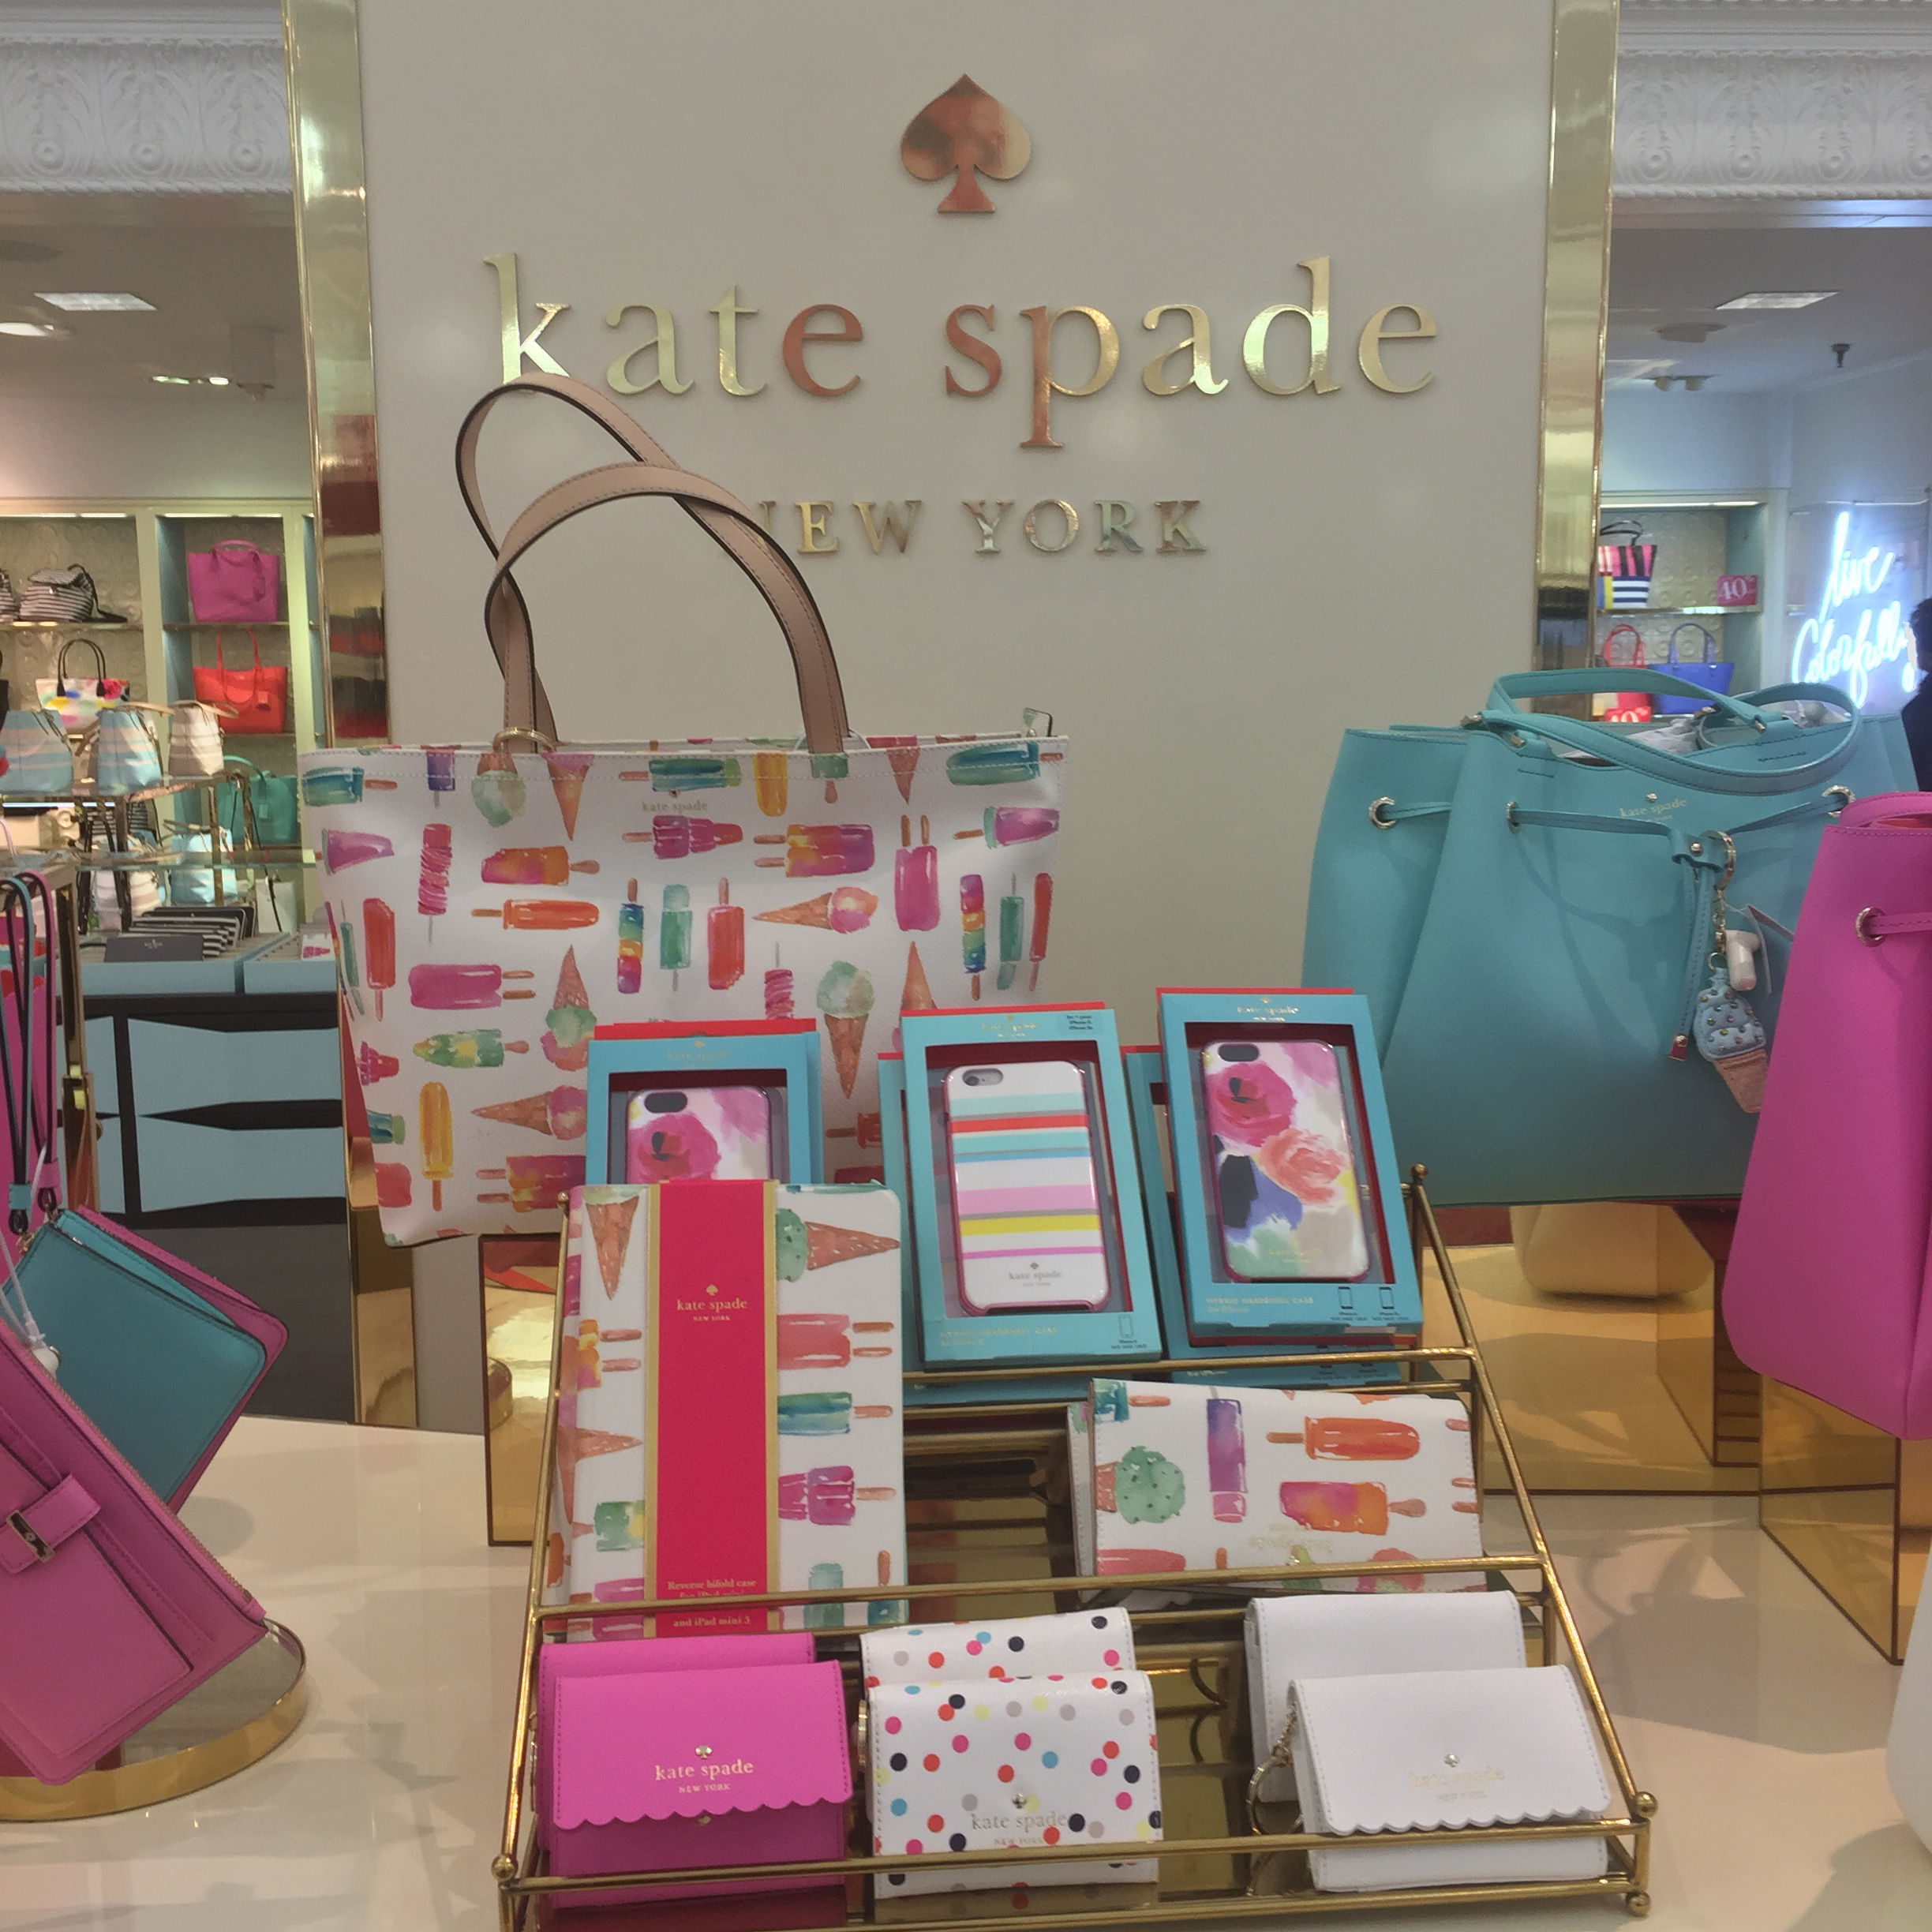 Kate Spade New York Spring 2016 Bags & Accessories - Fashion Trendsetter